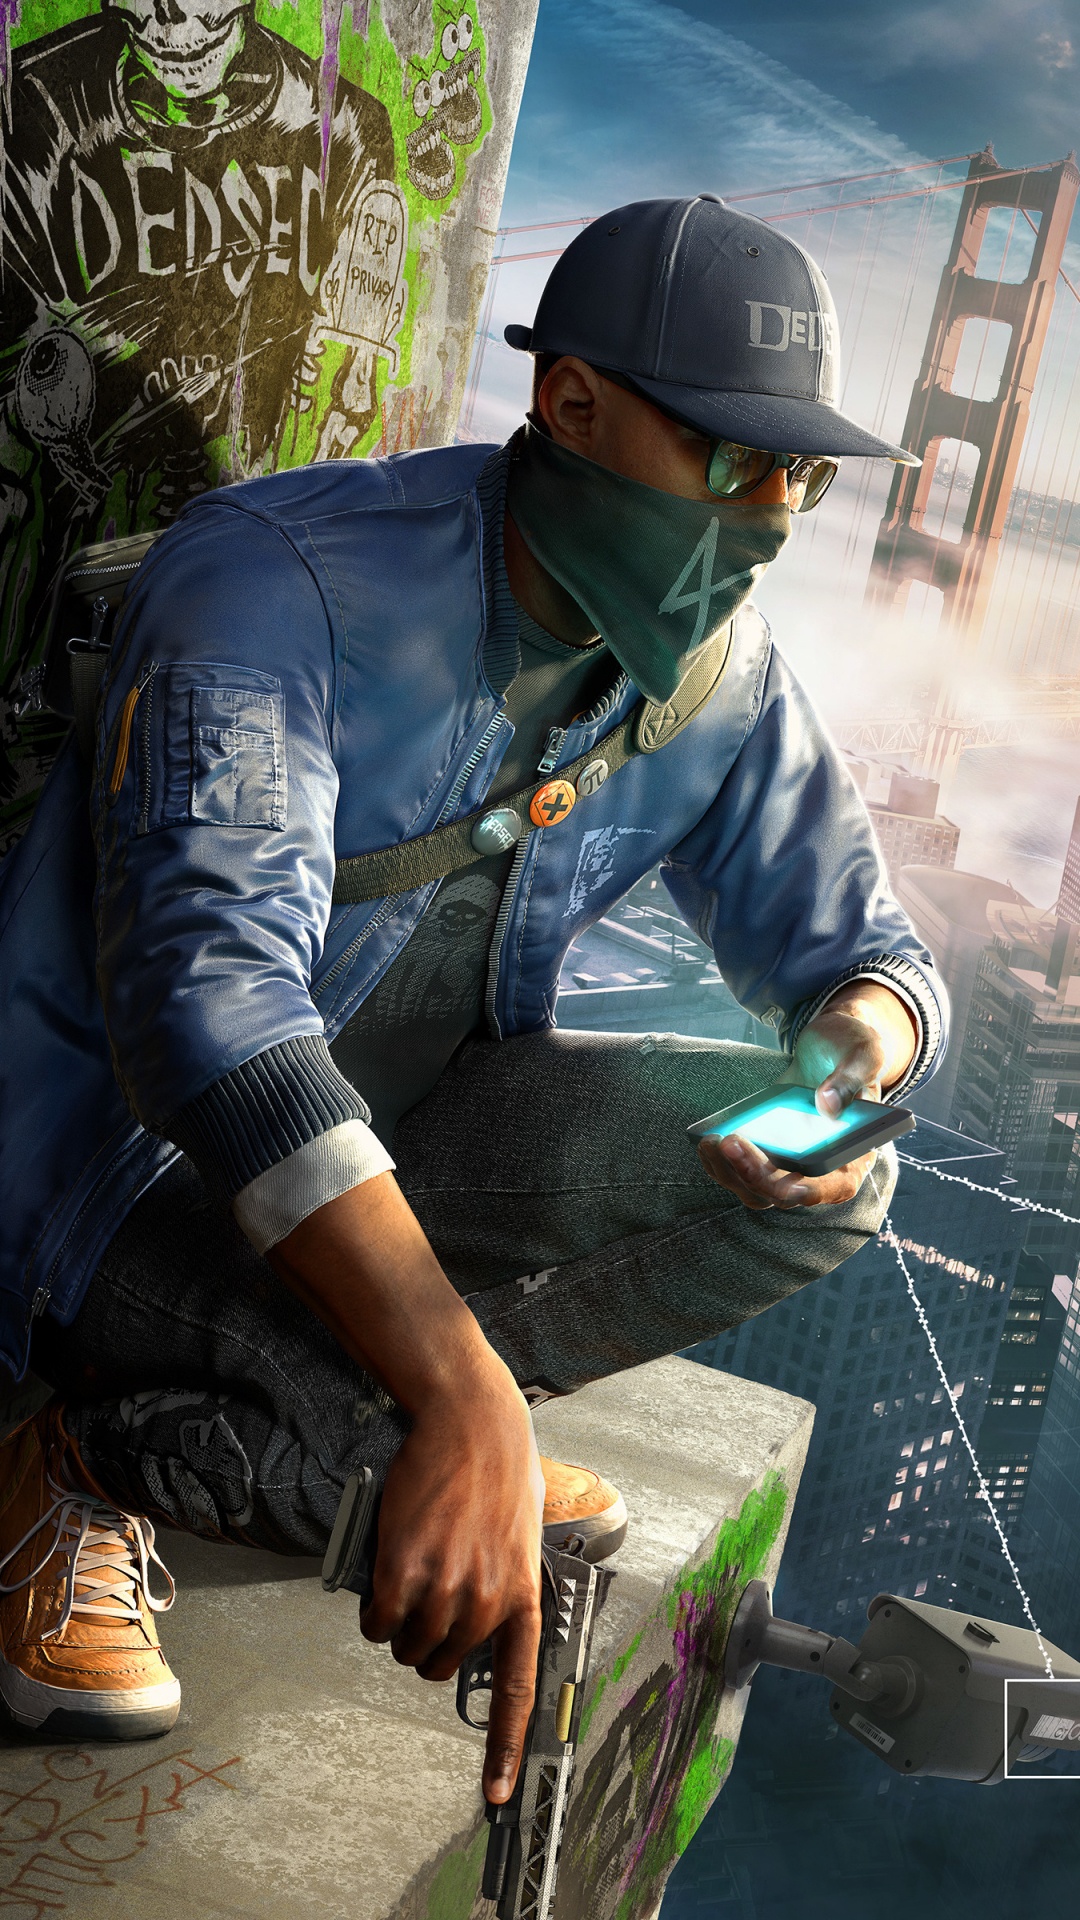 Watch Dogs 2, Watch Dogs, Ubisoft, Playstation 4, pc Game. Wallpaper in 1080x1920 Resolution